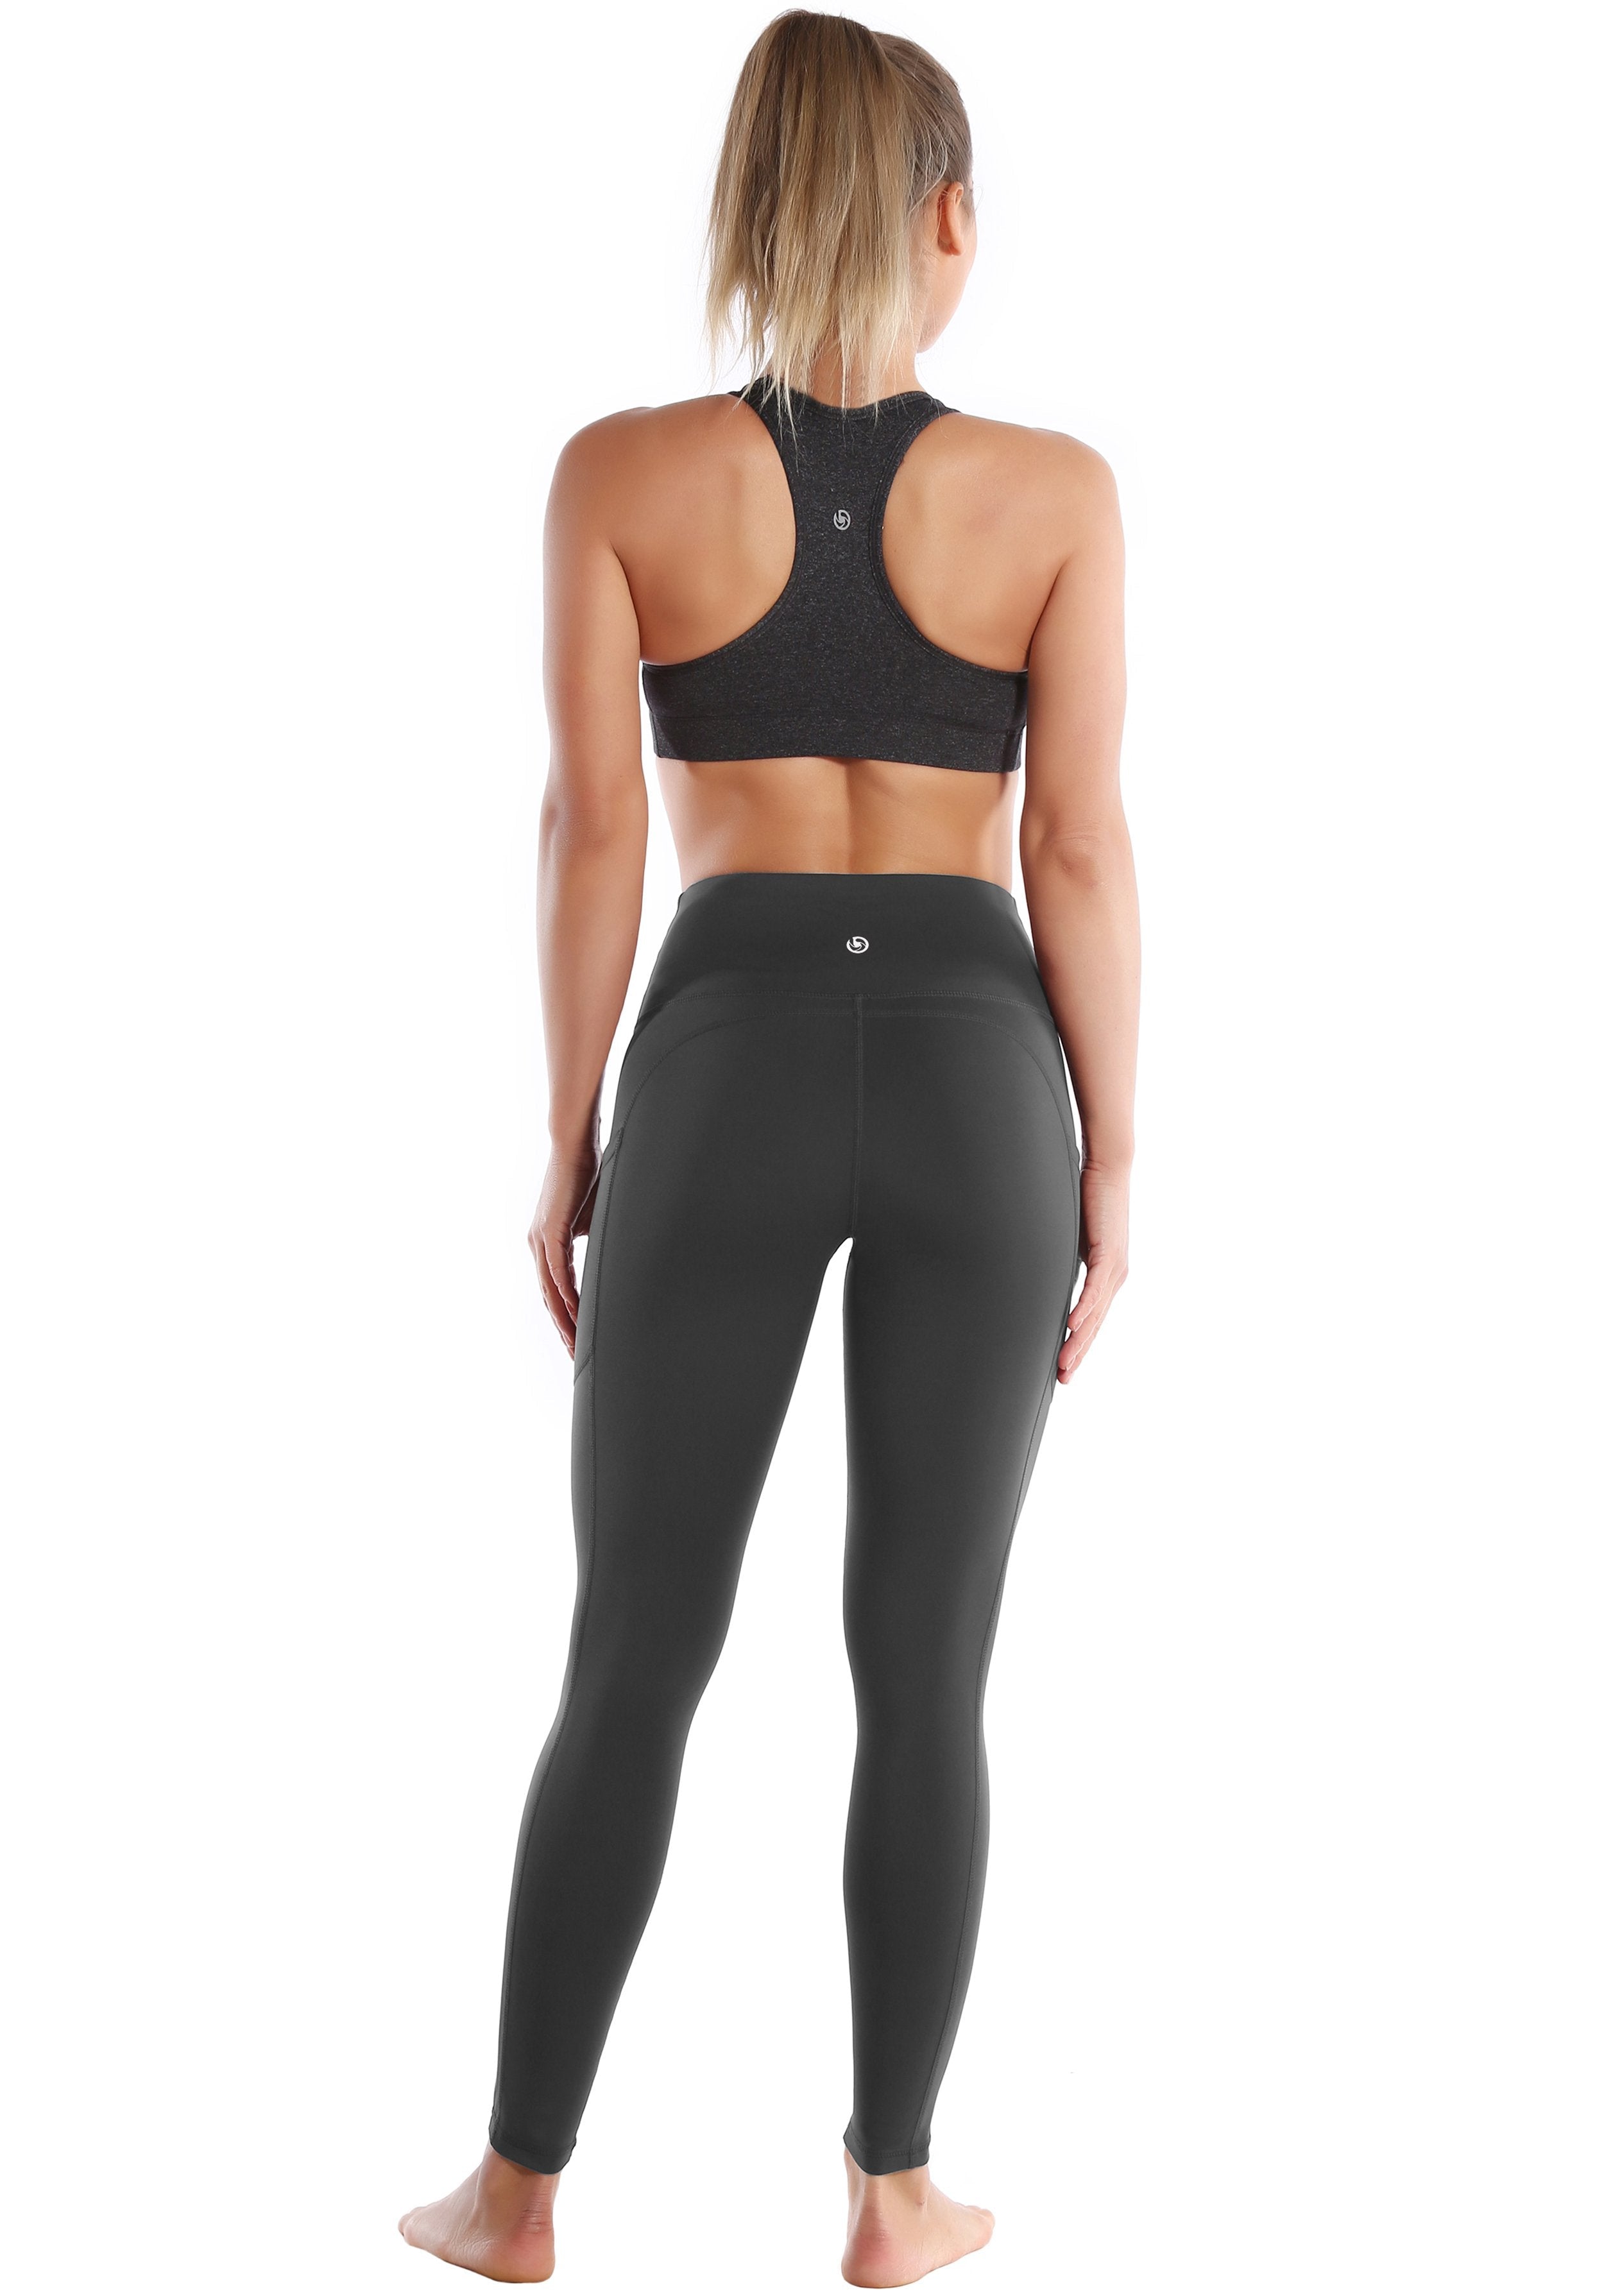 Hip Line Side Pockets Plus Size Pants shadowcharcoal Sexy Hip Line Side Pockets 75%Nylon/25%Spandex Fabric doesn't attract lint easily 4-way stretch No see-through Moisture-wicking Tummy control Inner pocket Two lengths